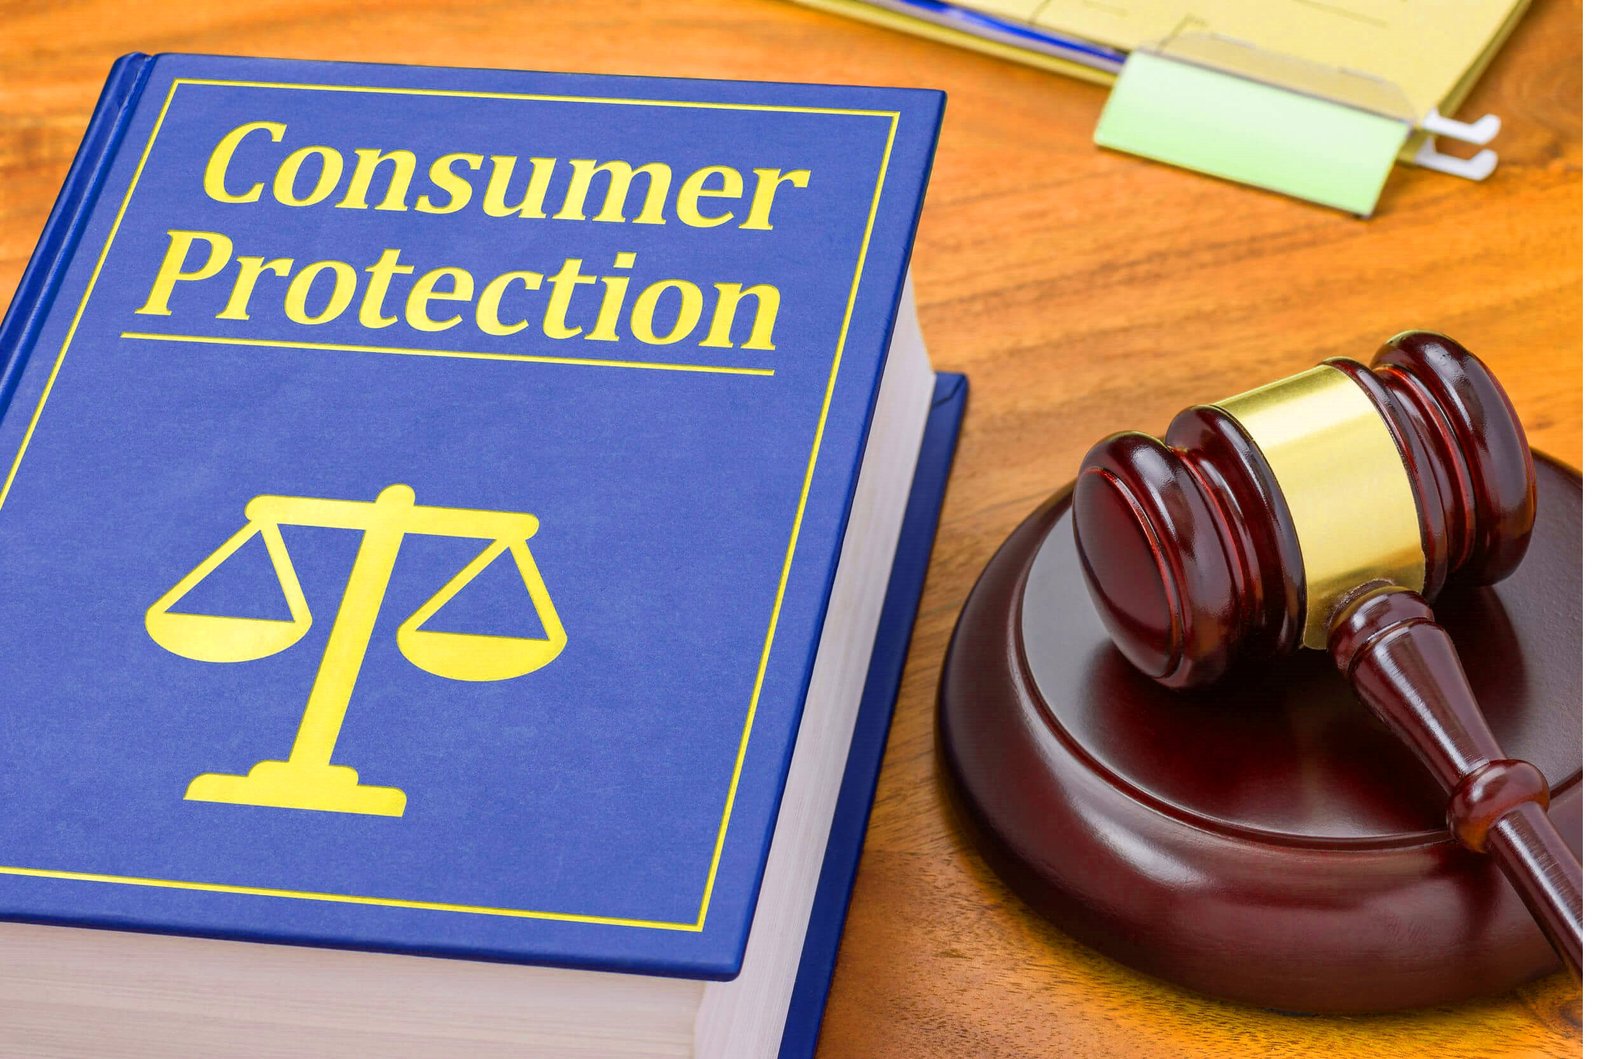 Laws and Resources for Consumer Protection